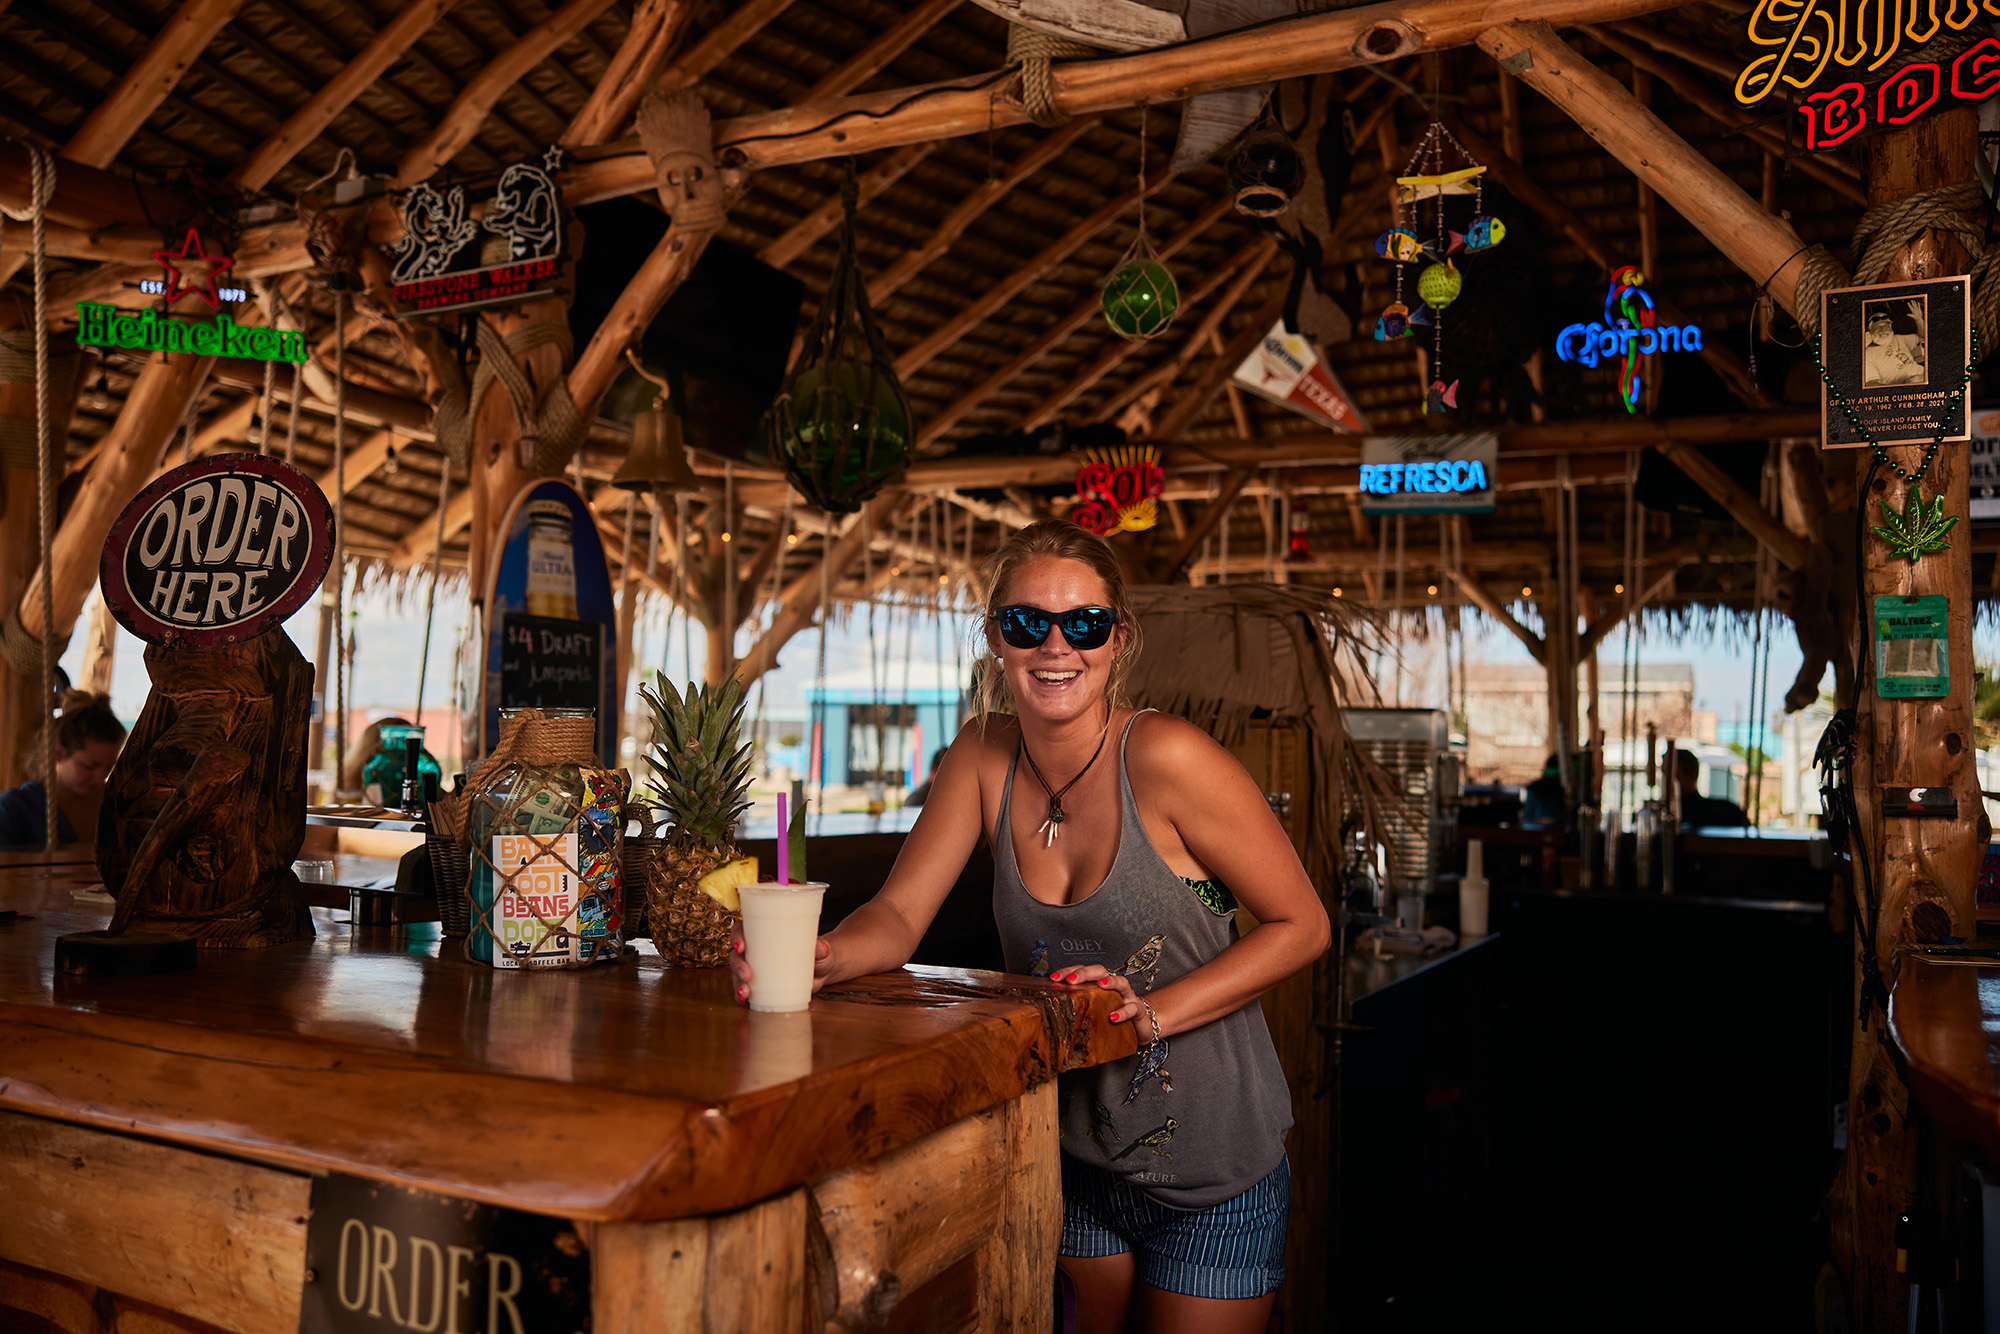 A woman stands at a table in the wood-paneled interior of Port Aransas' Beer Hut with a drink